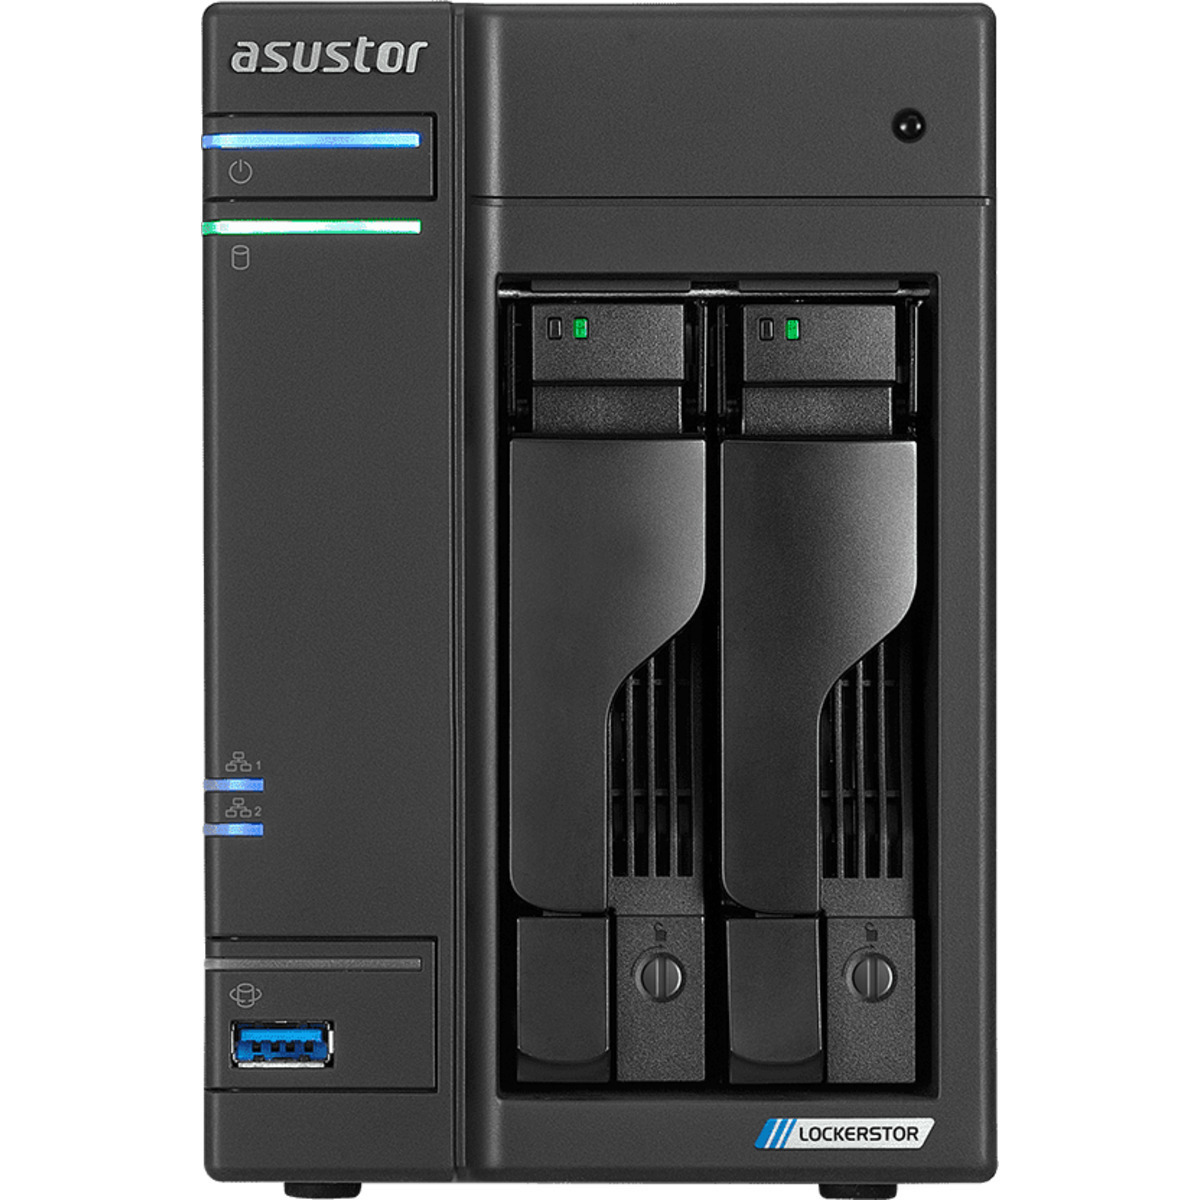 buy $680 ASUSTOR AS6602T Lockerstor 2 4tb Desktop NAS - Network Attached Storage Device 2x2000gb Western Digital Blue WD20EZRZ 3.5 5400rpm SATA 6Gb/s HDD CONSUMER Class Drives Installed - Burn-In Tested - FREE RAM UPGRADE - nas headquarters buy network attached storage server device das new raid-5 free shipping usa christmas new year holiday sale AS6602T Lockerstor 2